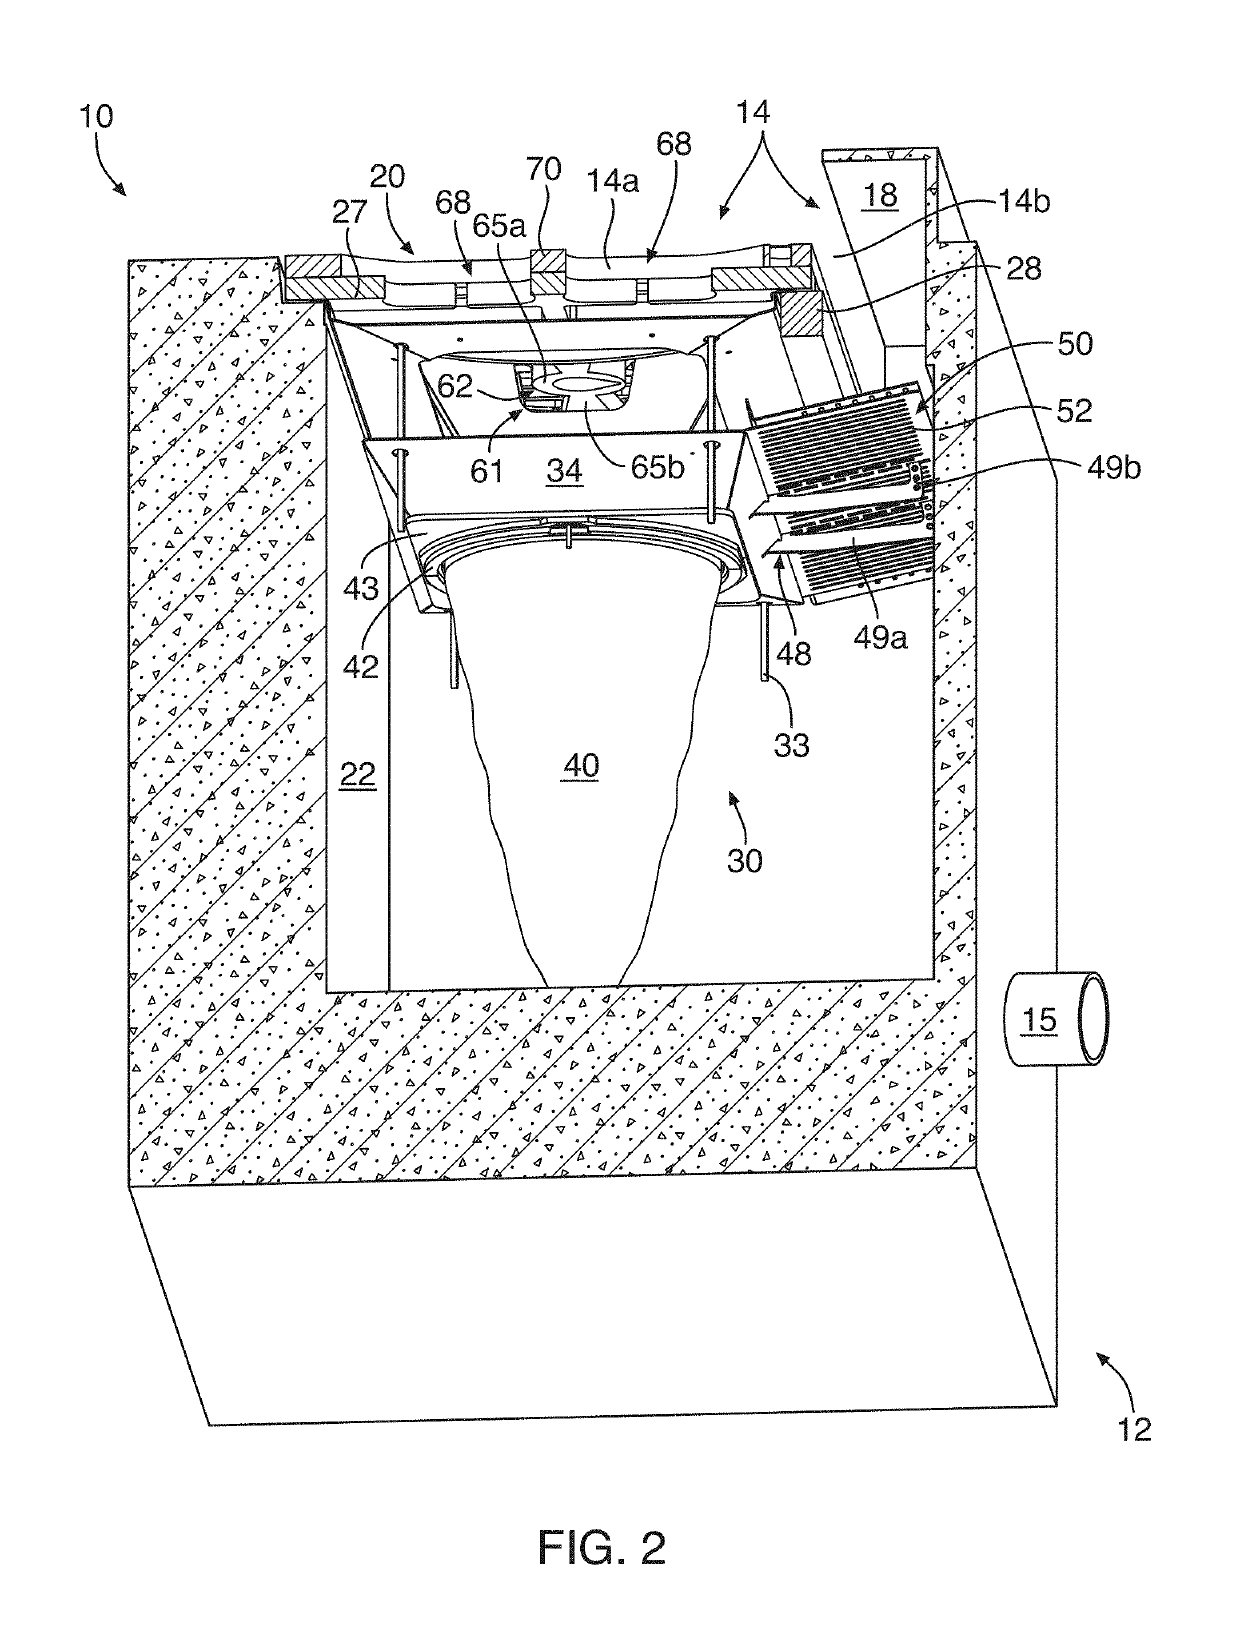 Storm drain grate and filter apparatus and method